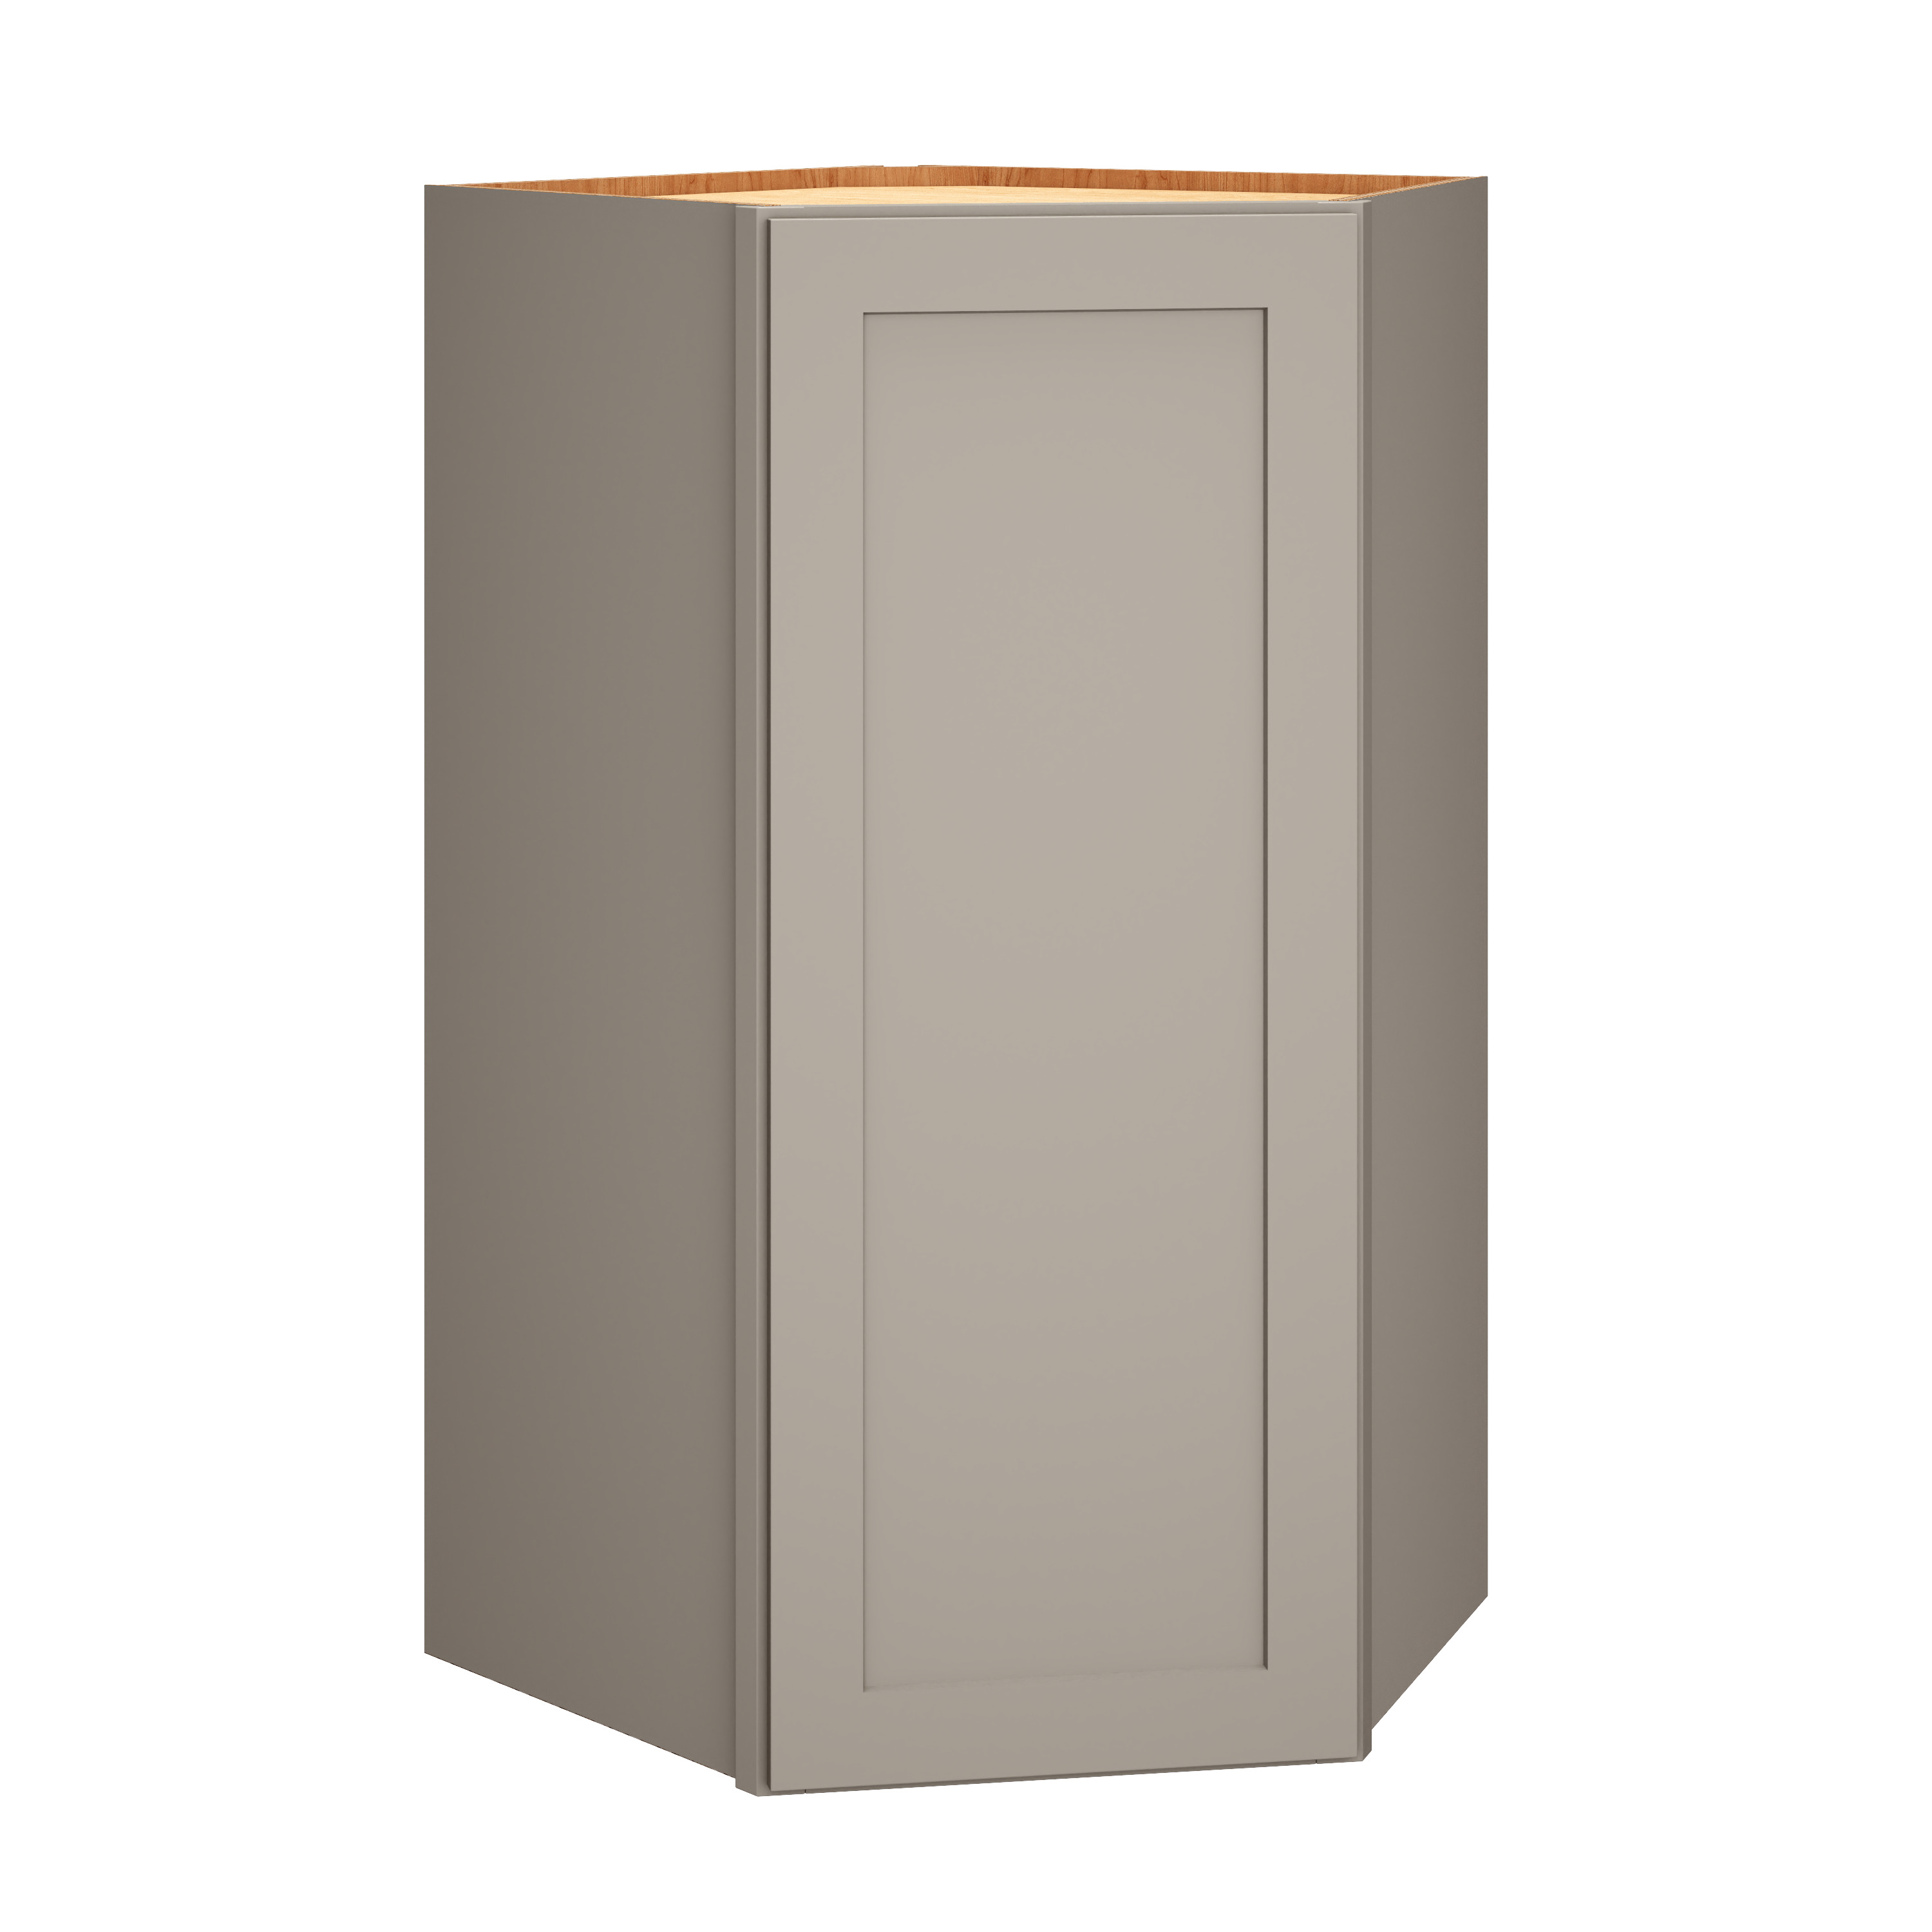 Diagonal Wall Cabinet in Mineral